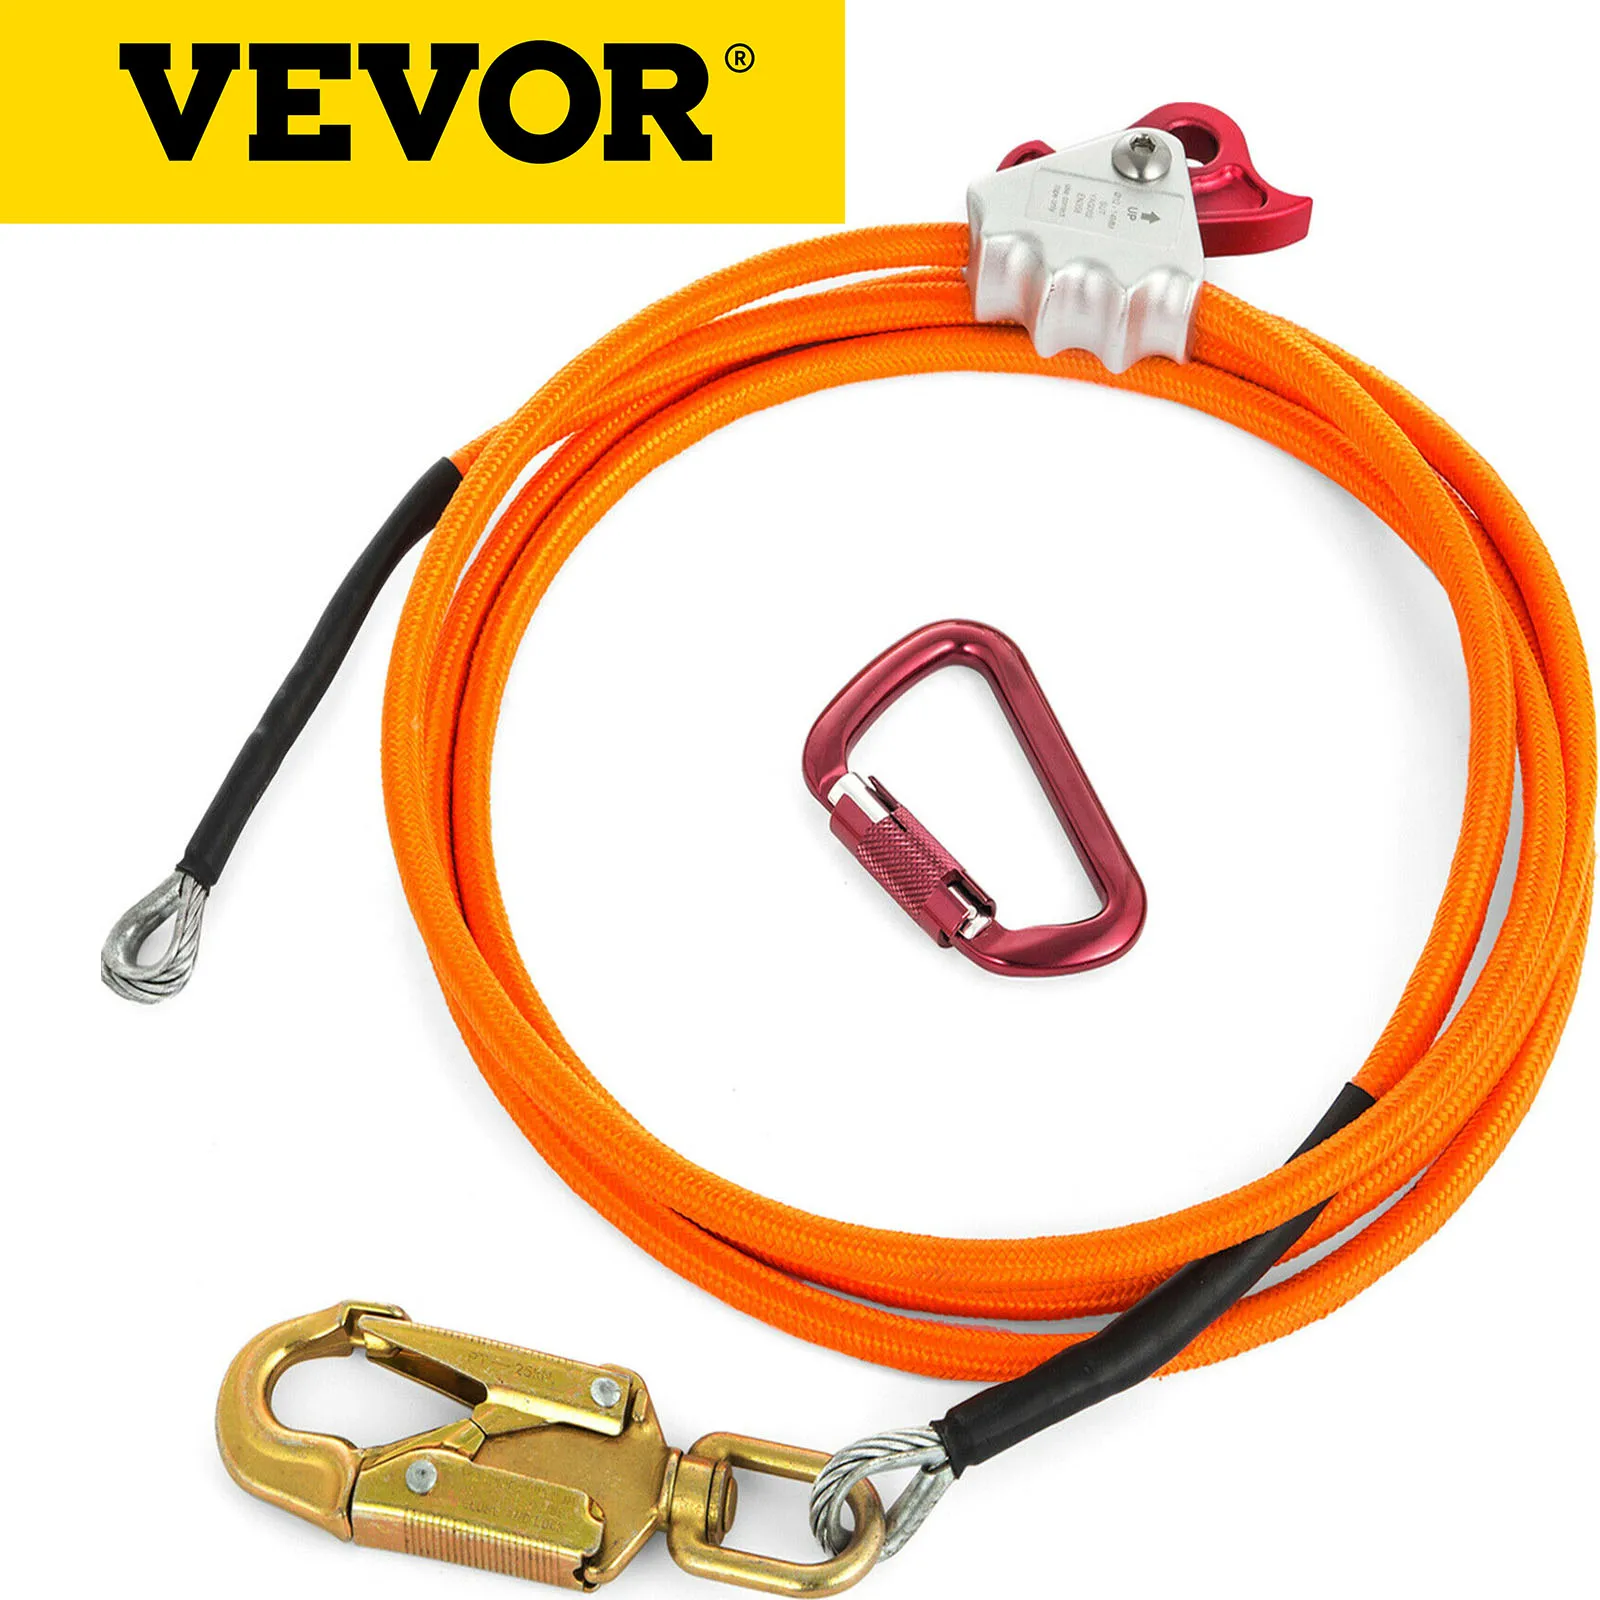 

VEVOR Safe Steel Core Lanyard Kit with Reliable Flipline Adjuster and Swivel Snaphook suitable for tree climbing and climbers